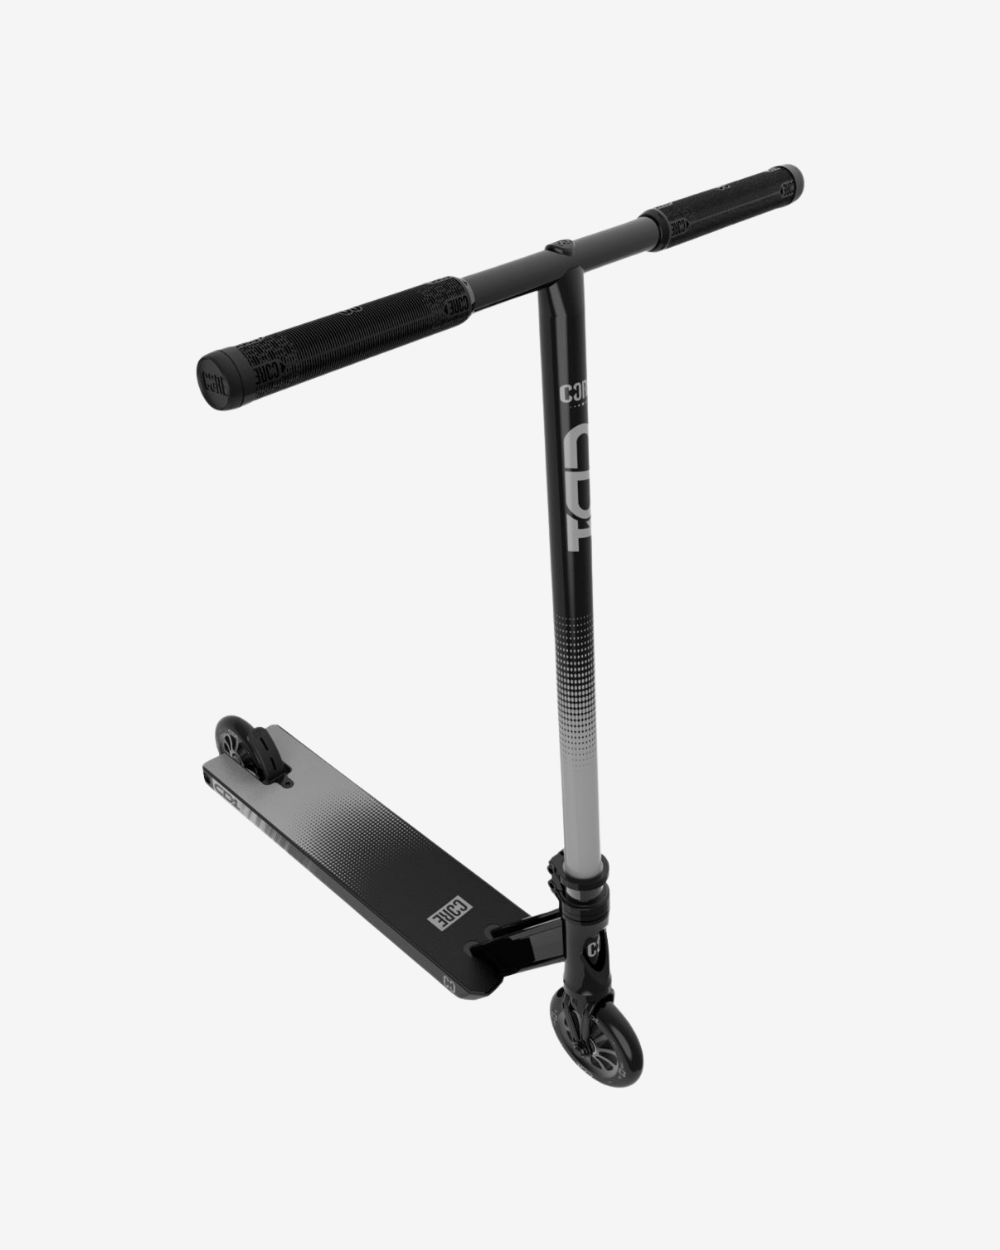 Core CD1 Complete Stunt Scooter | Black